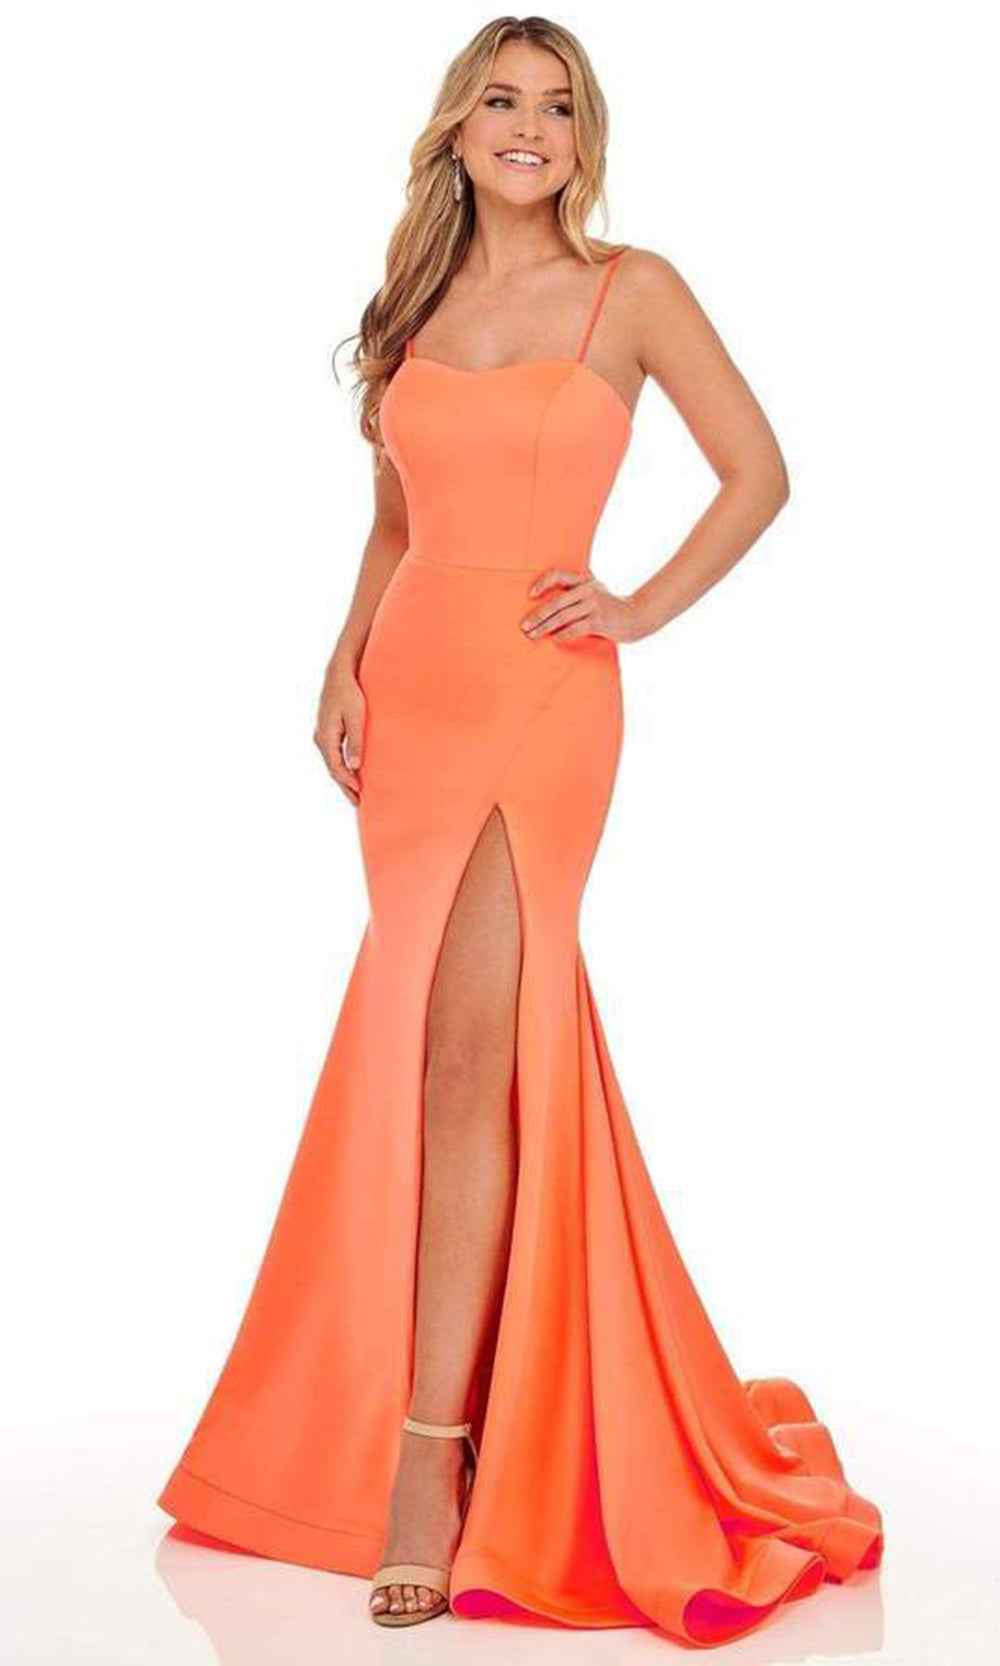 Rachel Allan - Sweetheart Bodice High Slit Mermaid Gown 70028 - 1 pc Tang In Size 2 Available CCSALE 2 / Tang